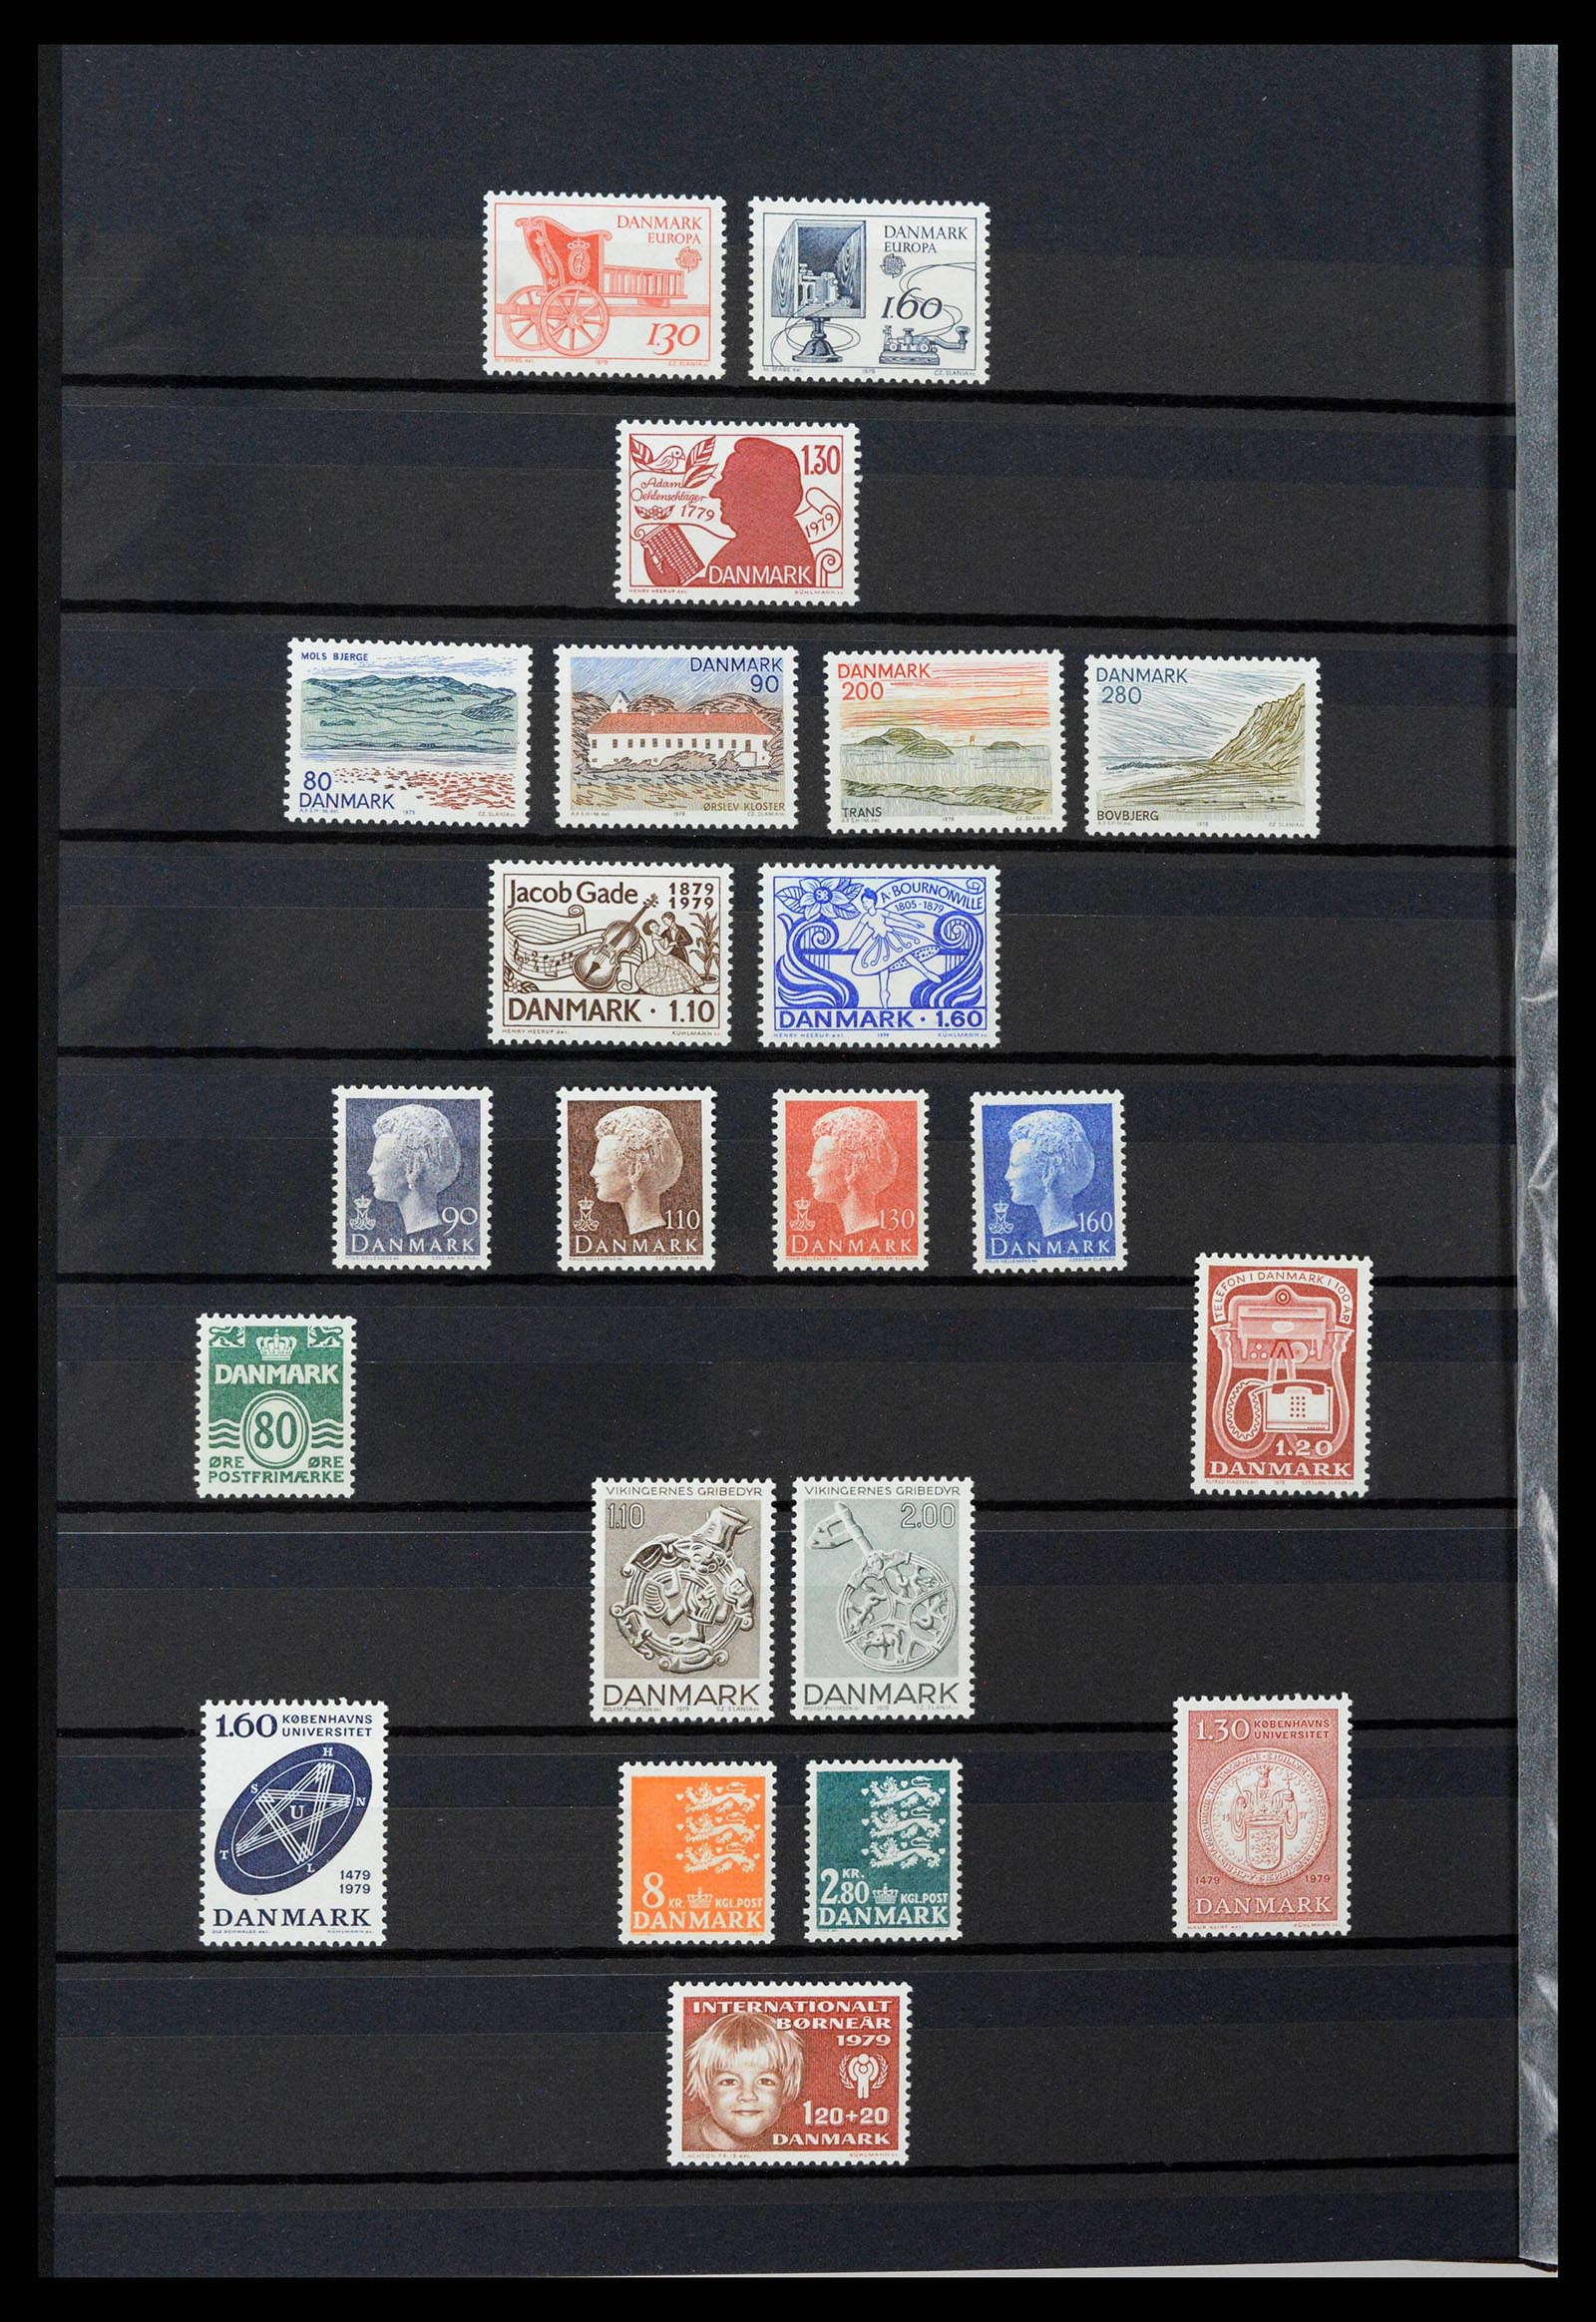 38858 0004 - Stamp collection 38858 Denmark 1976-2014.